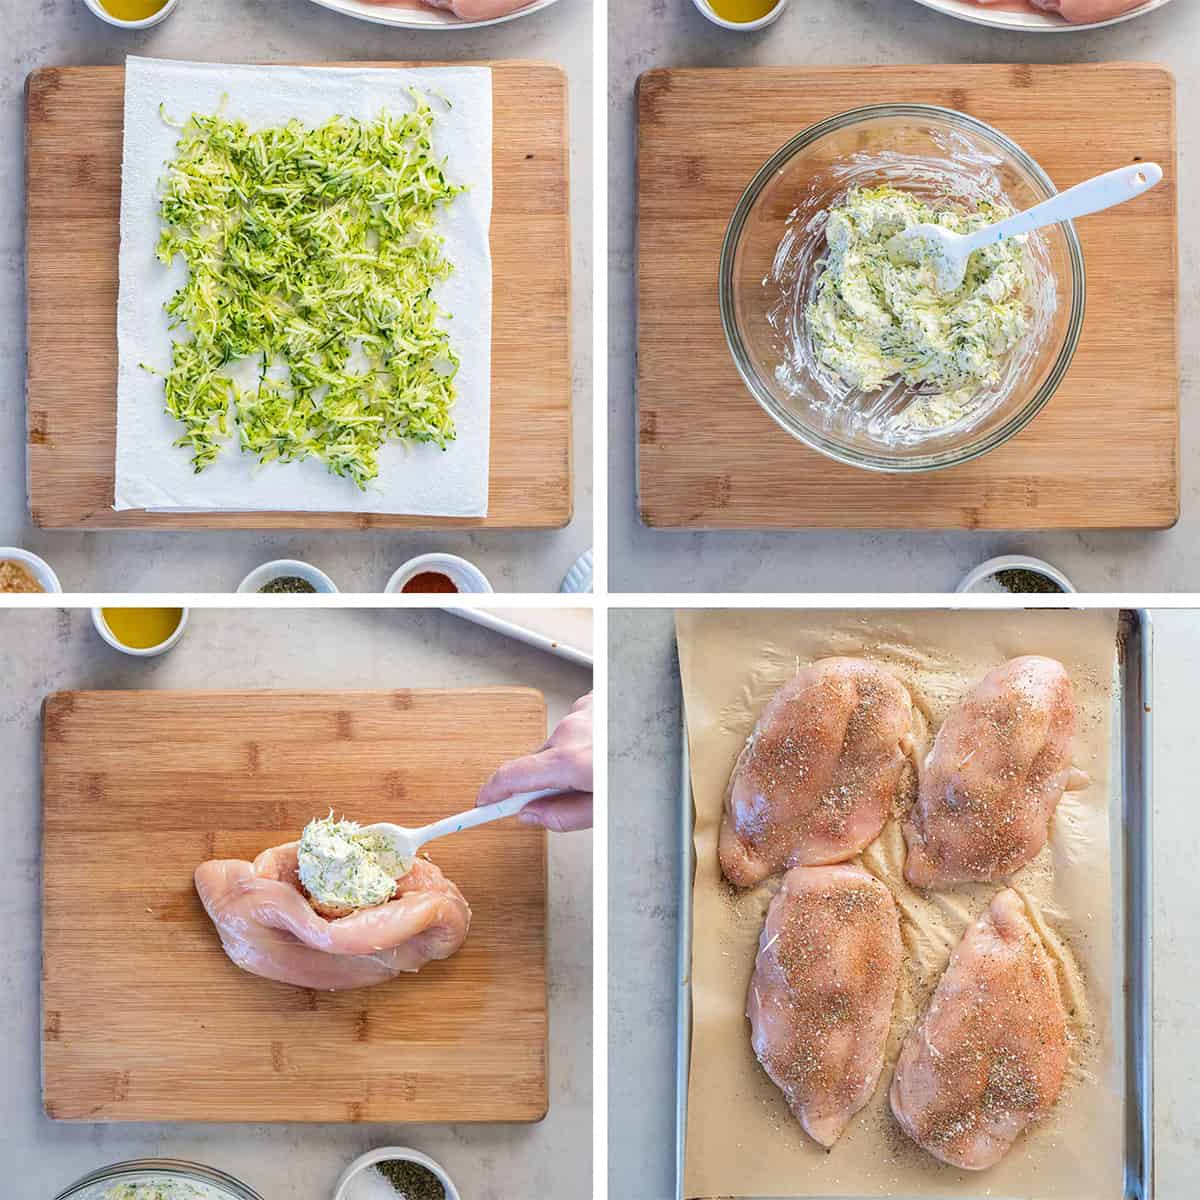 Four images of shredded zucchini, a mixing bowl with a zucchini feta mixture, and chicken stuffed with the filling.